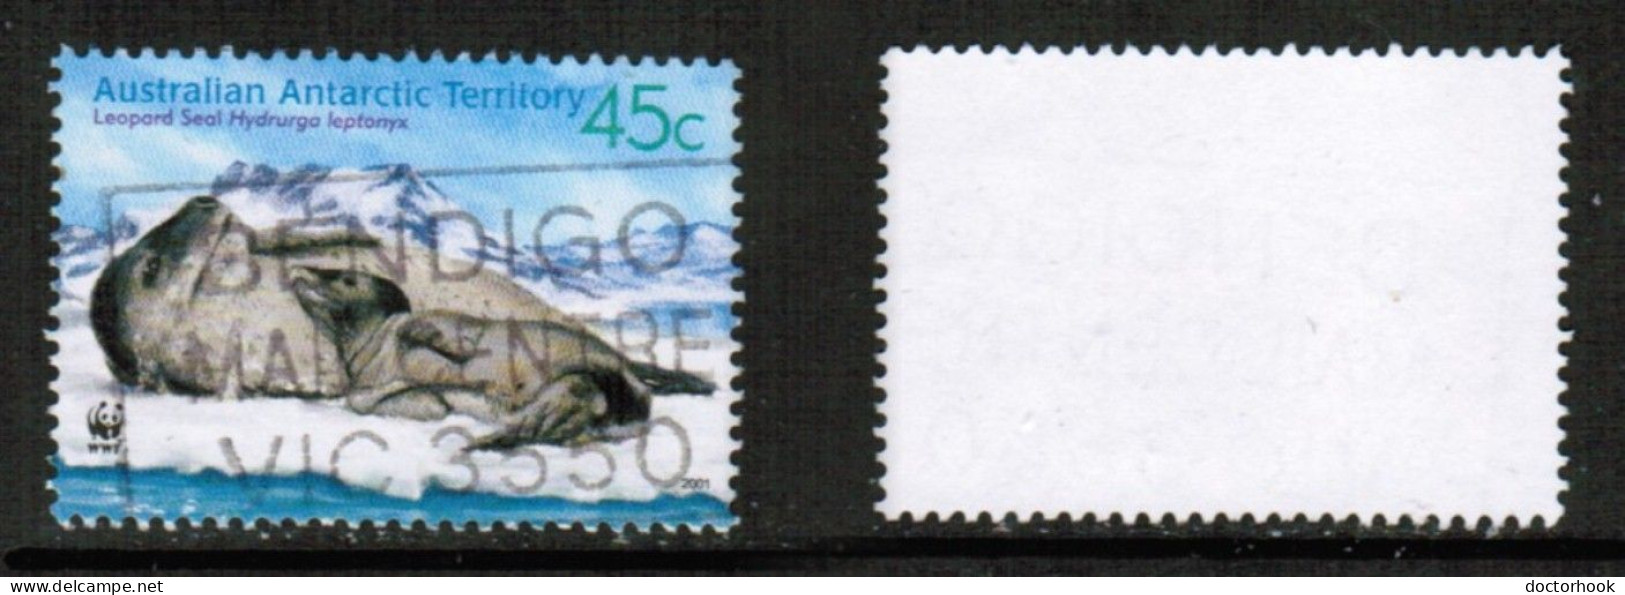 AUSTRALIAN ANTARCTIC TERRITORY   Scott # L 118a USED (CONDITION AS PER SCAN) (Stamp Scan # 930-11) - Usados